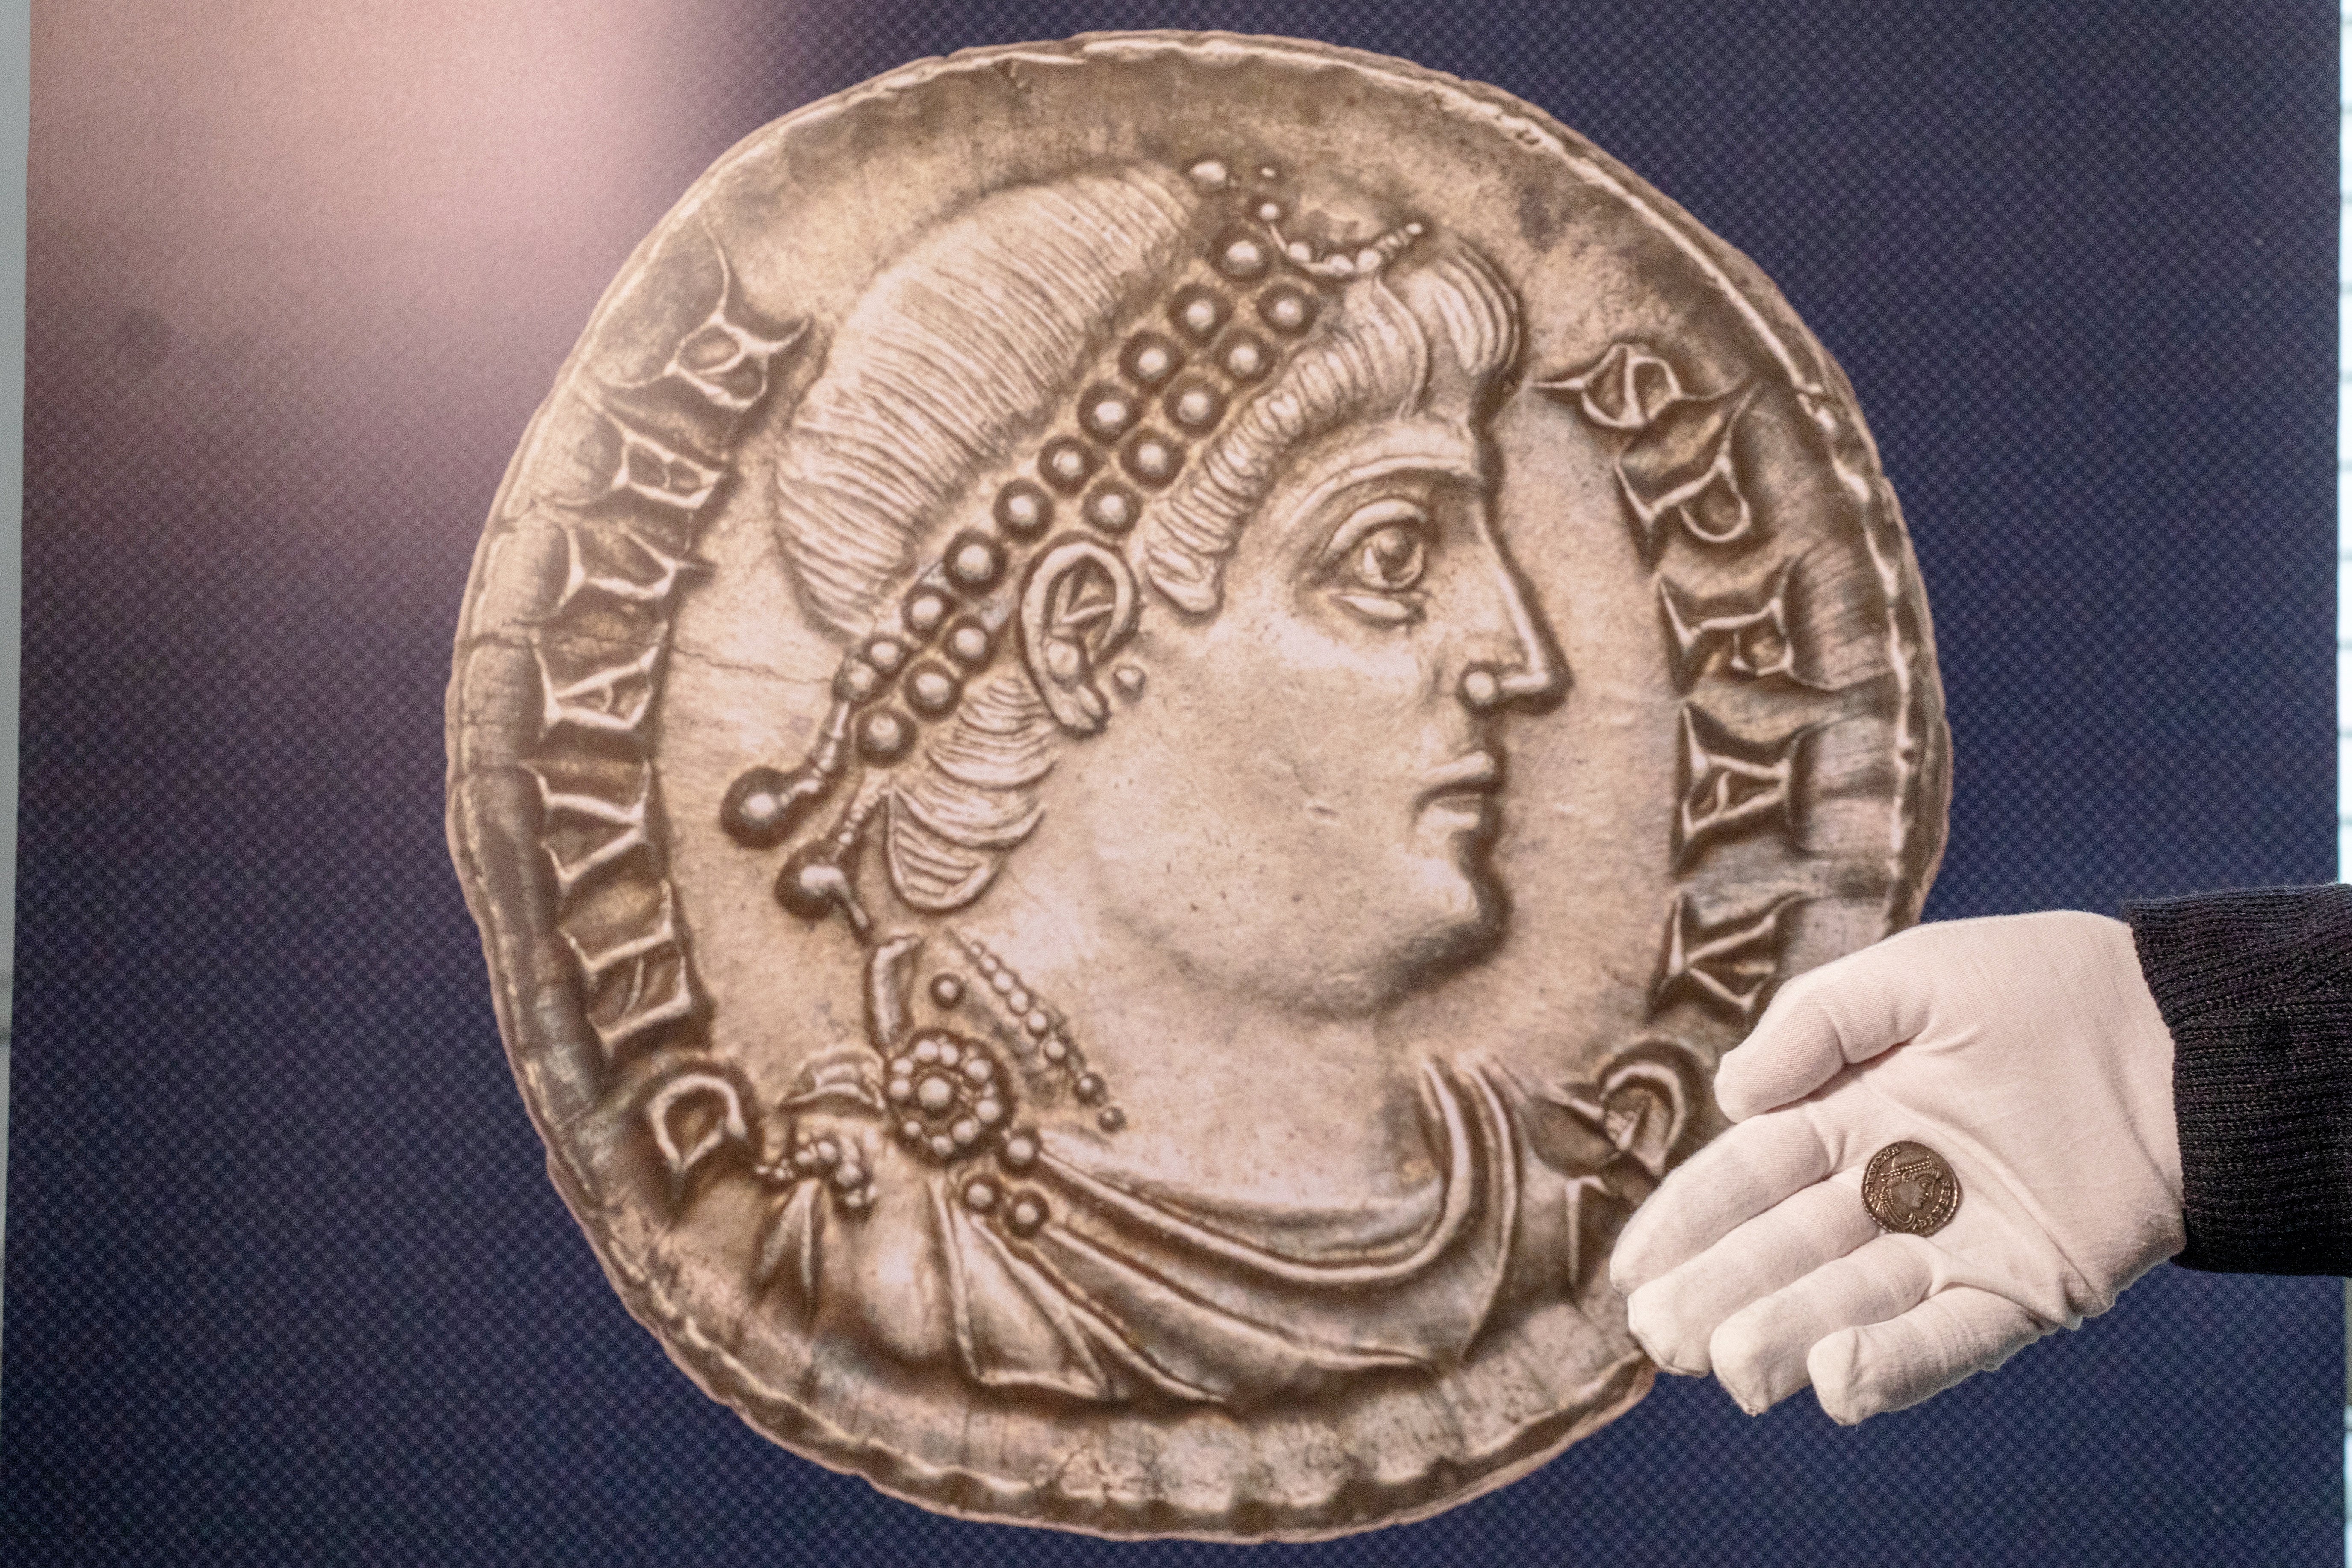 The 161 silver coins, dubbed the ‘Pewsey Hoard’, were estimated to be worth between £30,000-£40,000